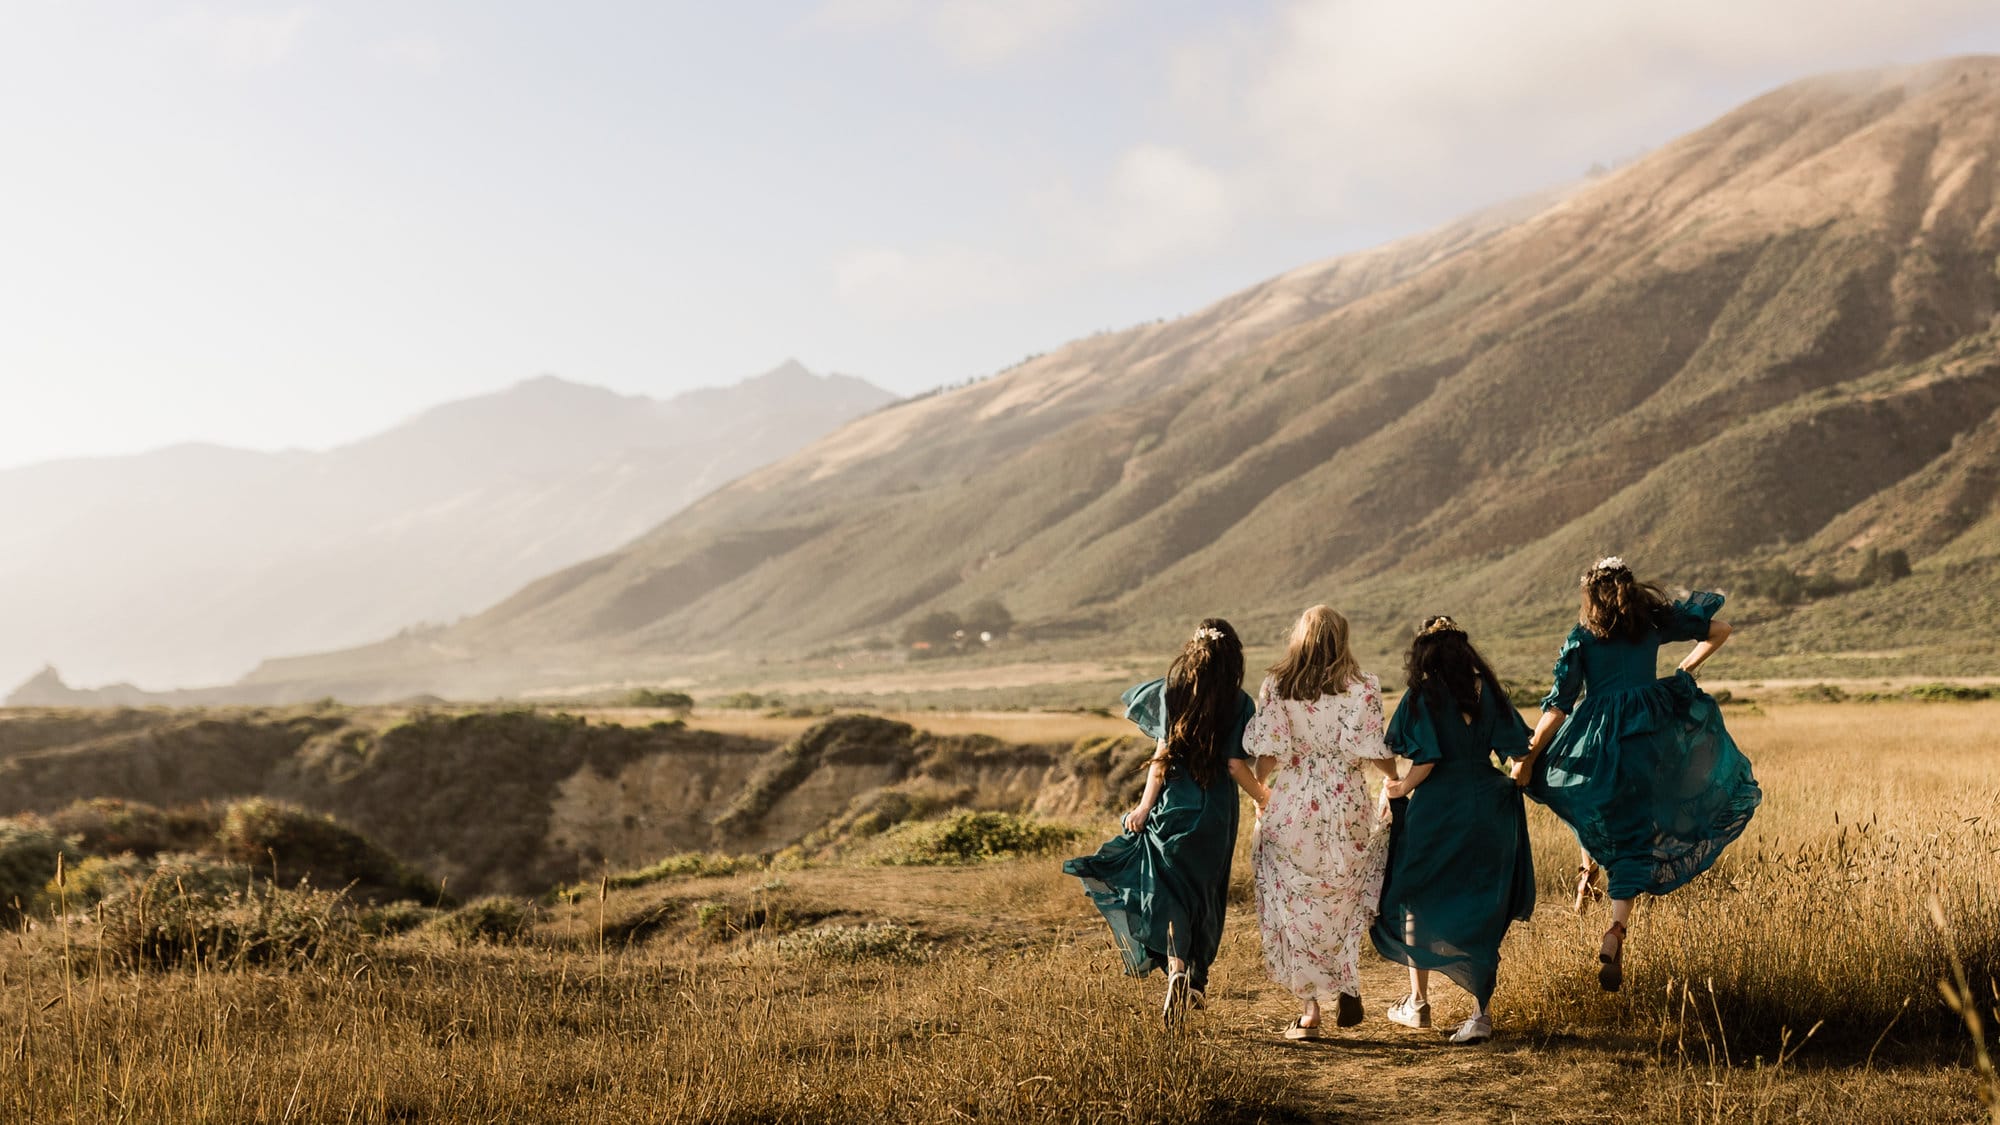 This two day Big Sur elopement is the epitome of romance and adventure. Full of coastal views and redwood trees, this elopement is one for the books.